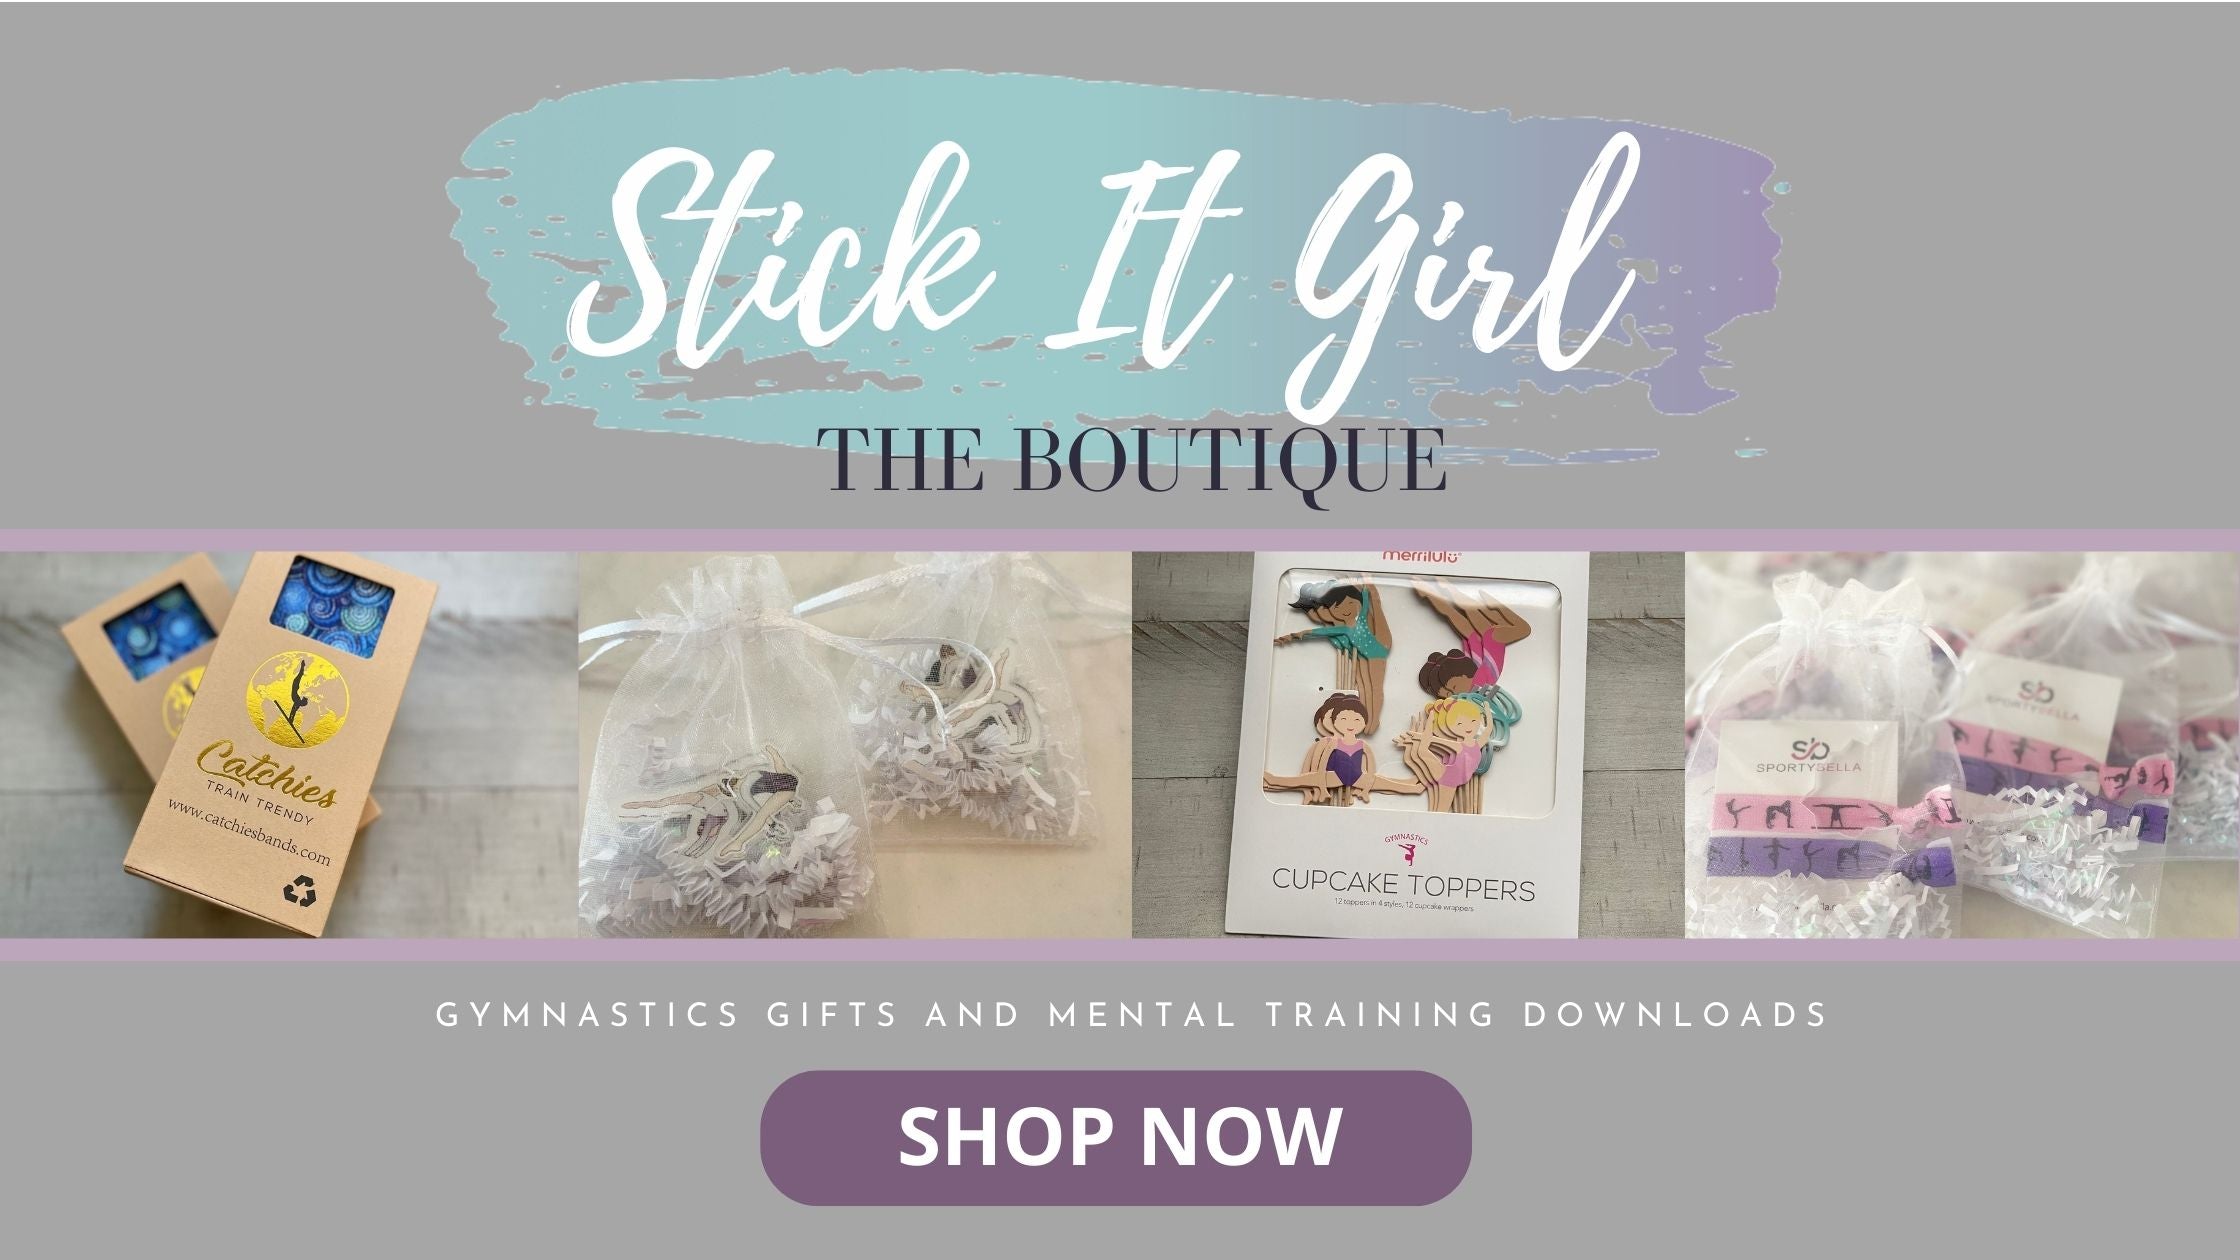 Shop the Stick It Girl Boutique - gymnastics gifts